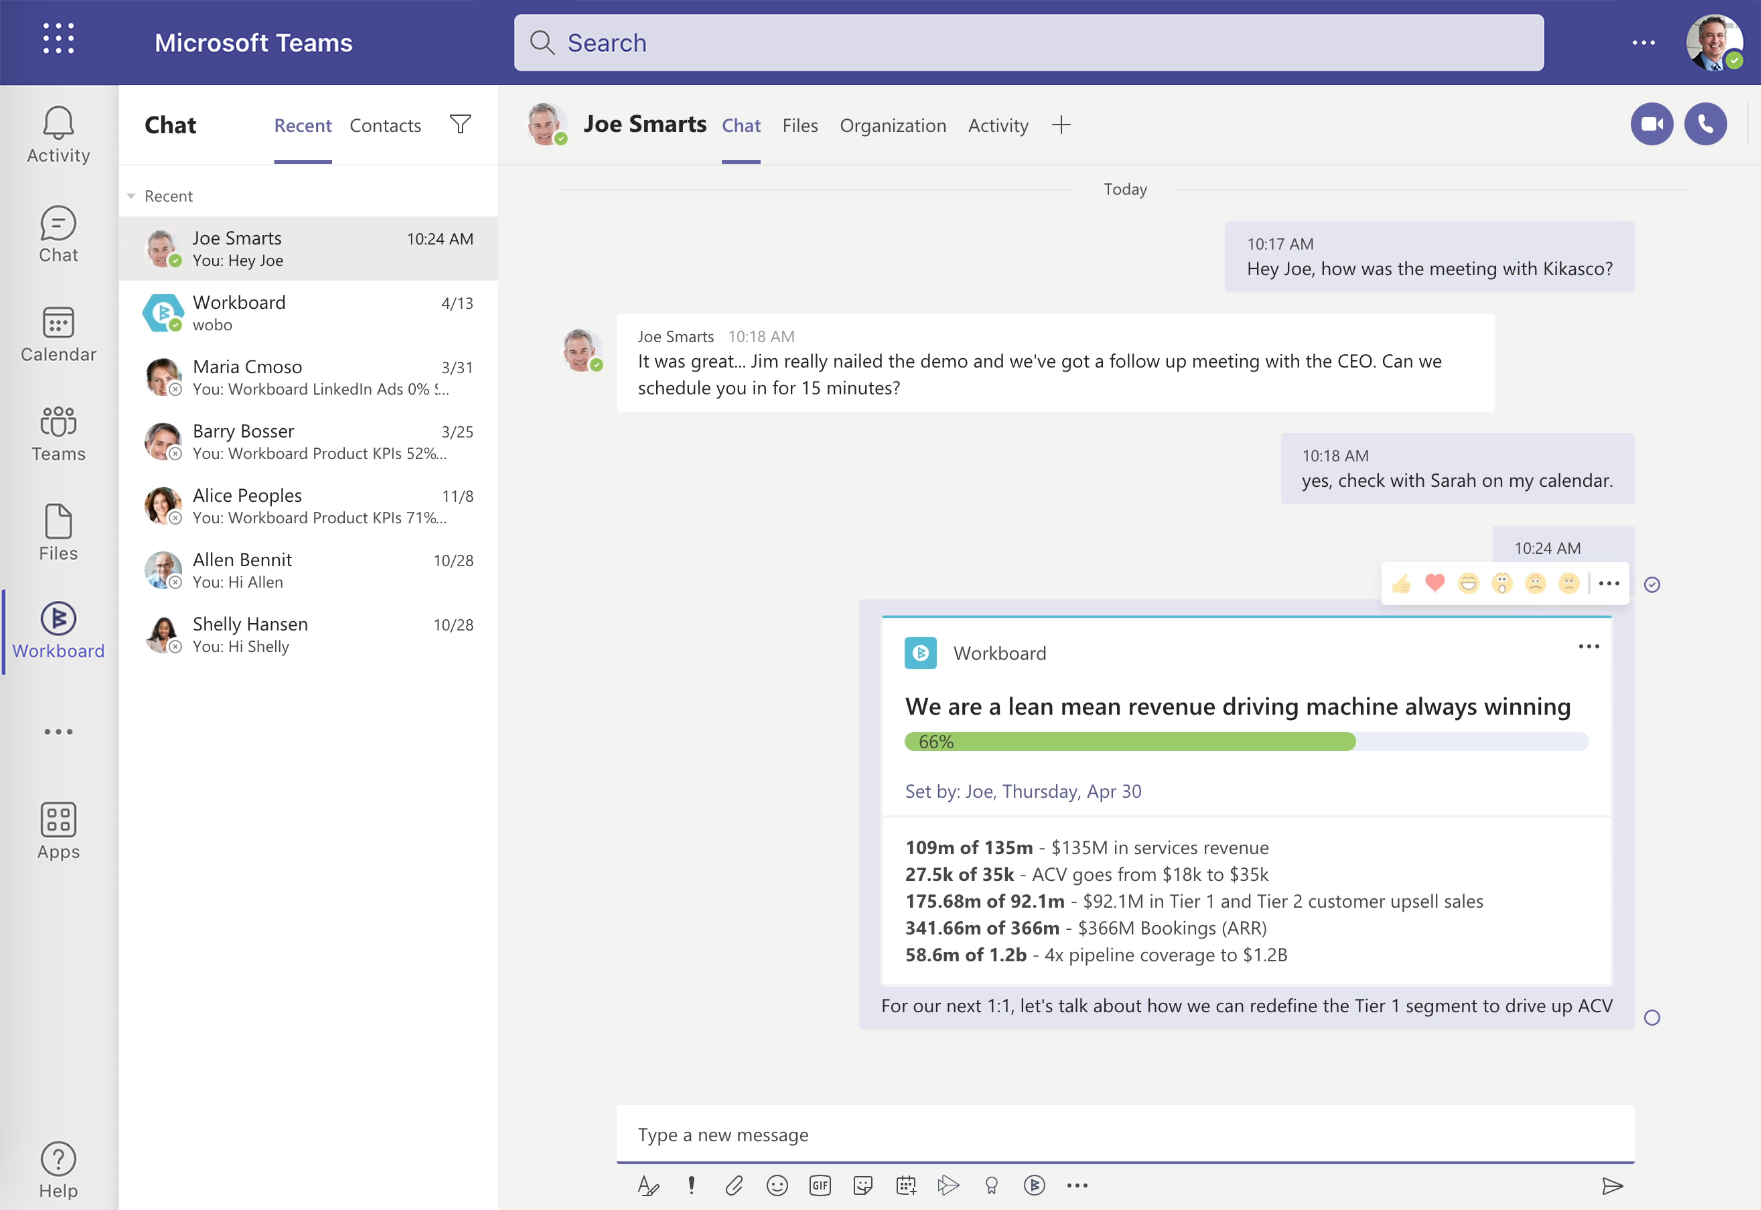 Get Strategy Execution Right in Microsoft Teams